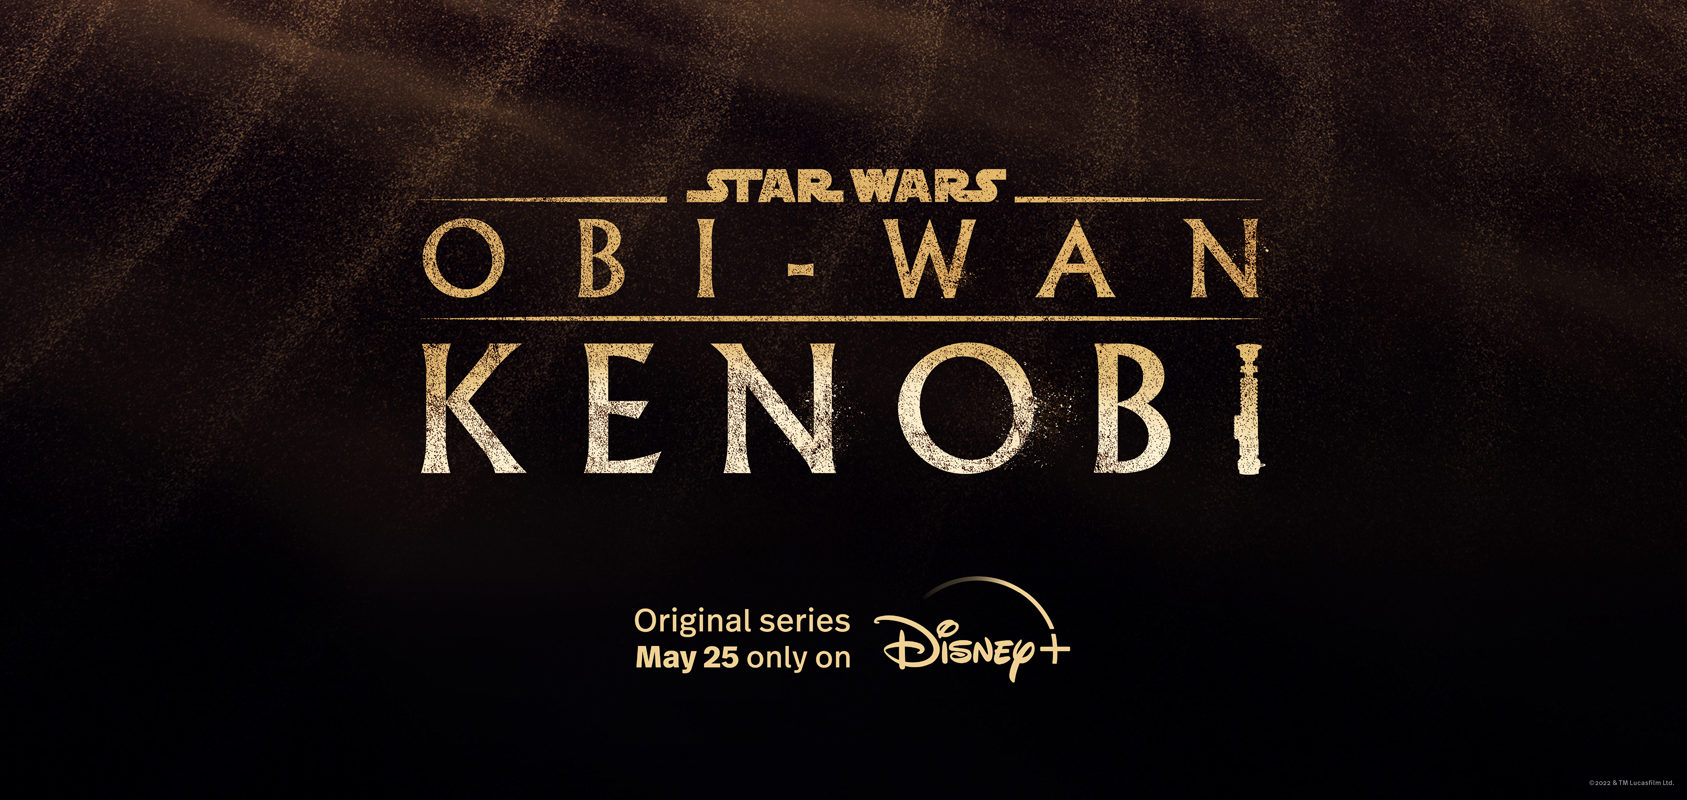 First Official Obi-Wan Kenobi Images Hit - Could The Trailer Be Next?